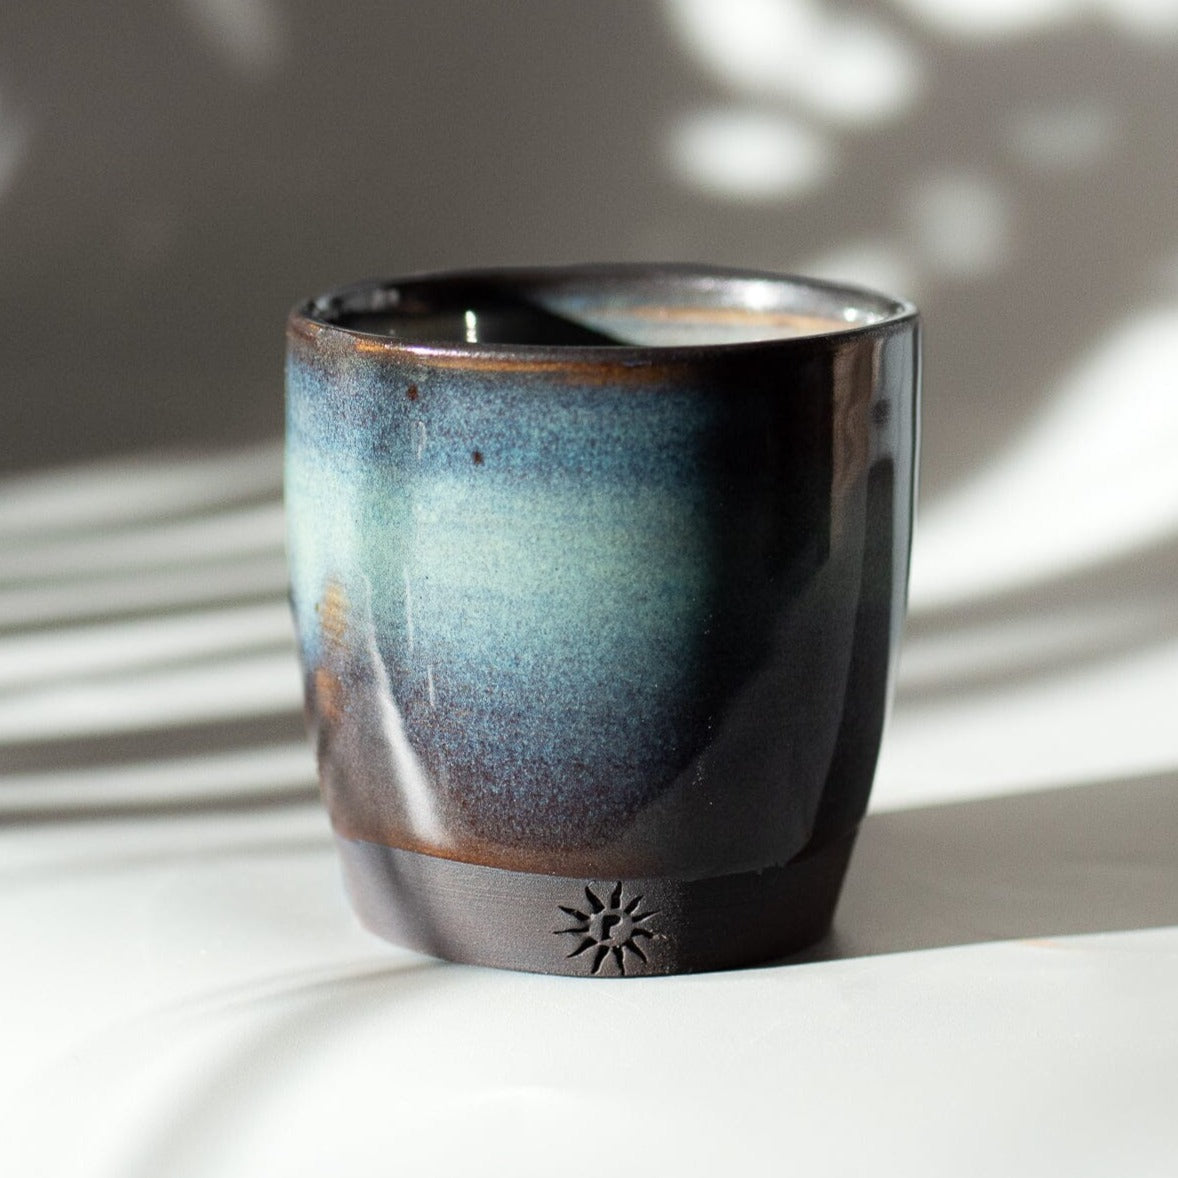 Turquoise espresso cup hand thrown in black clay. Floating blue glaze.